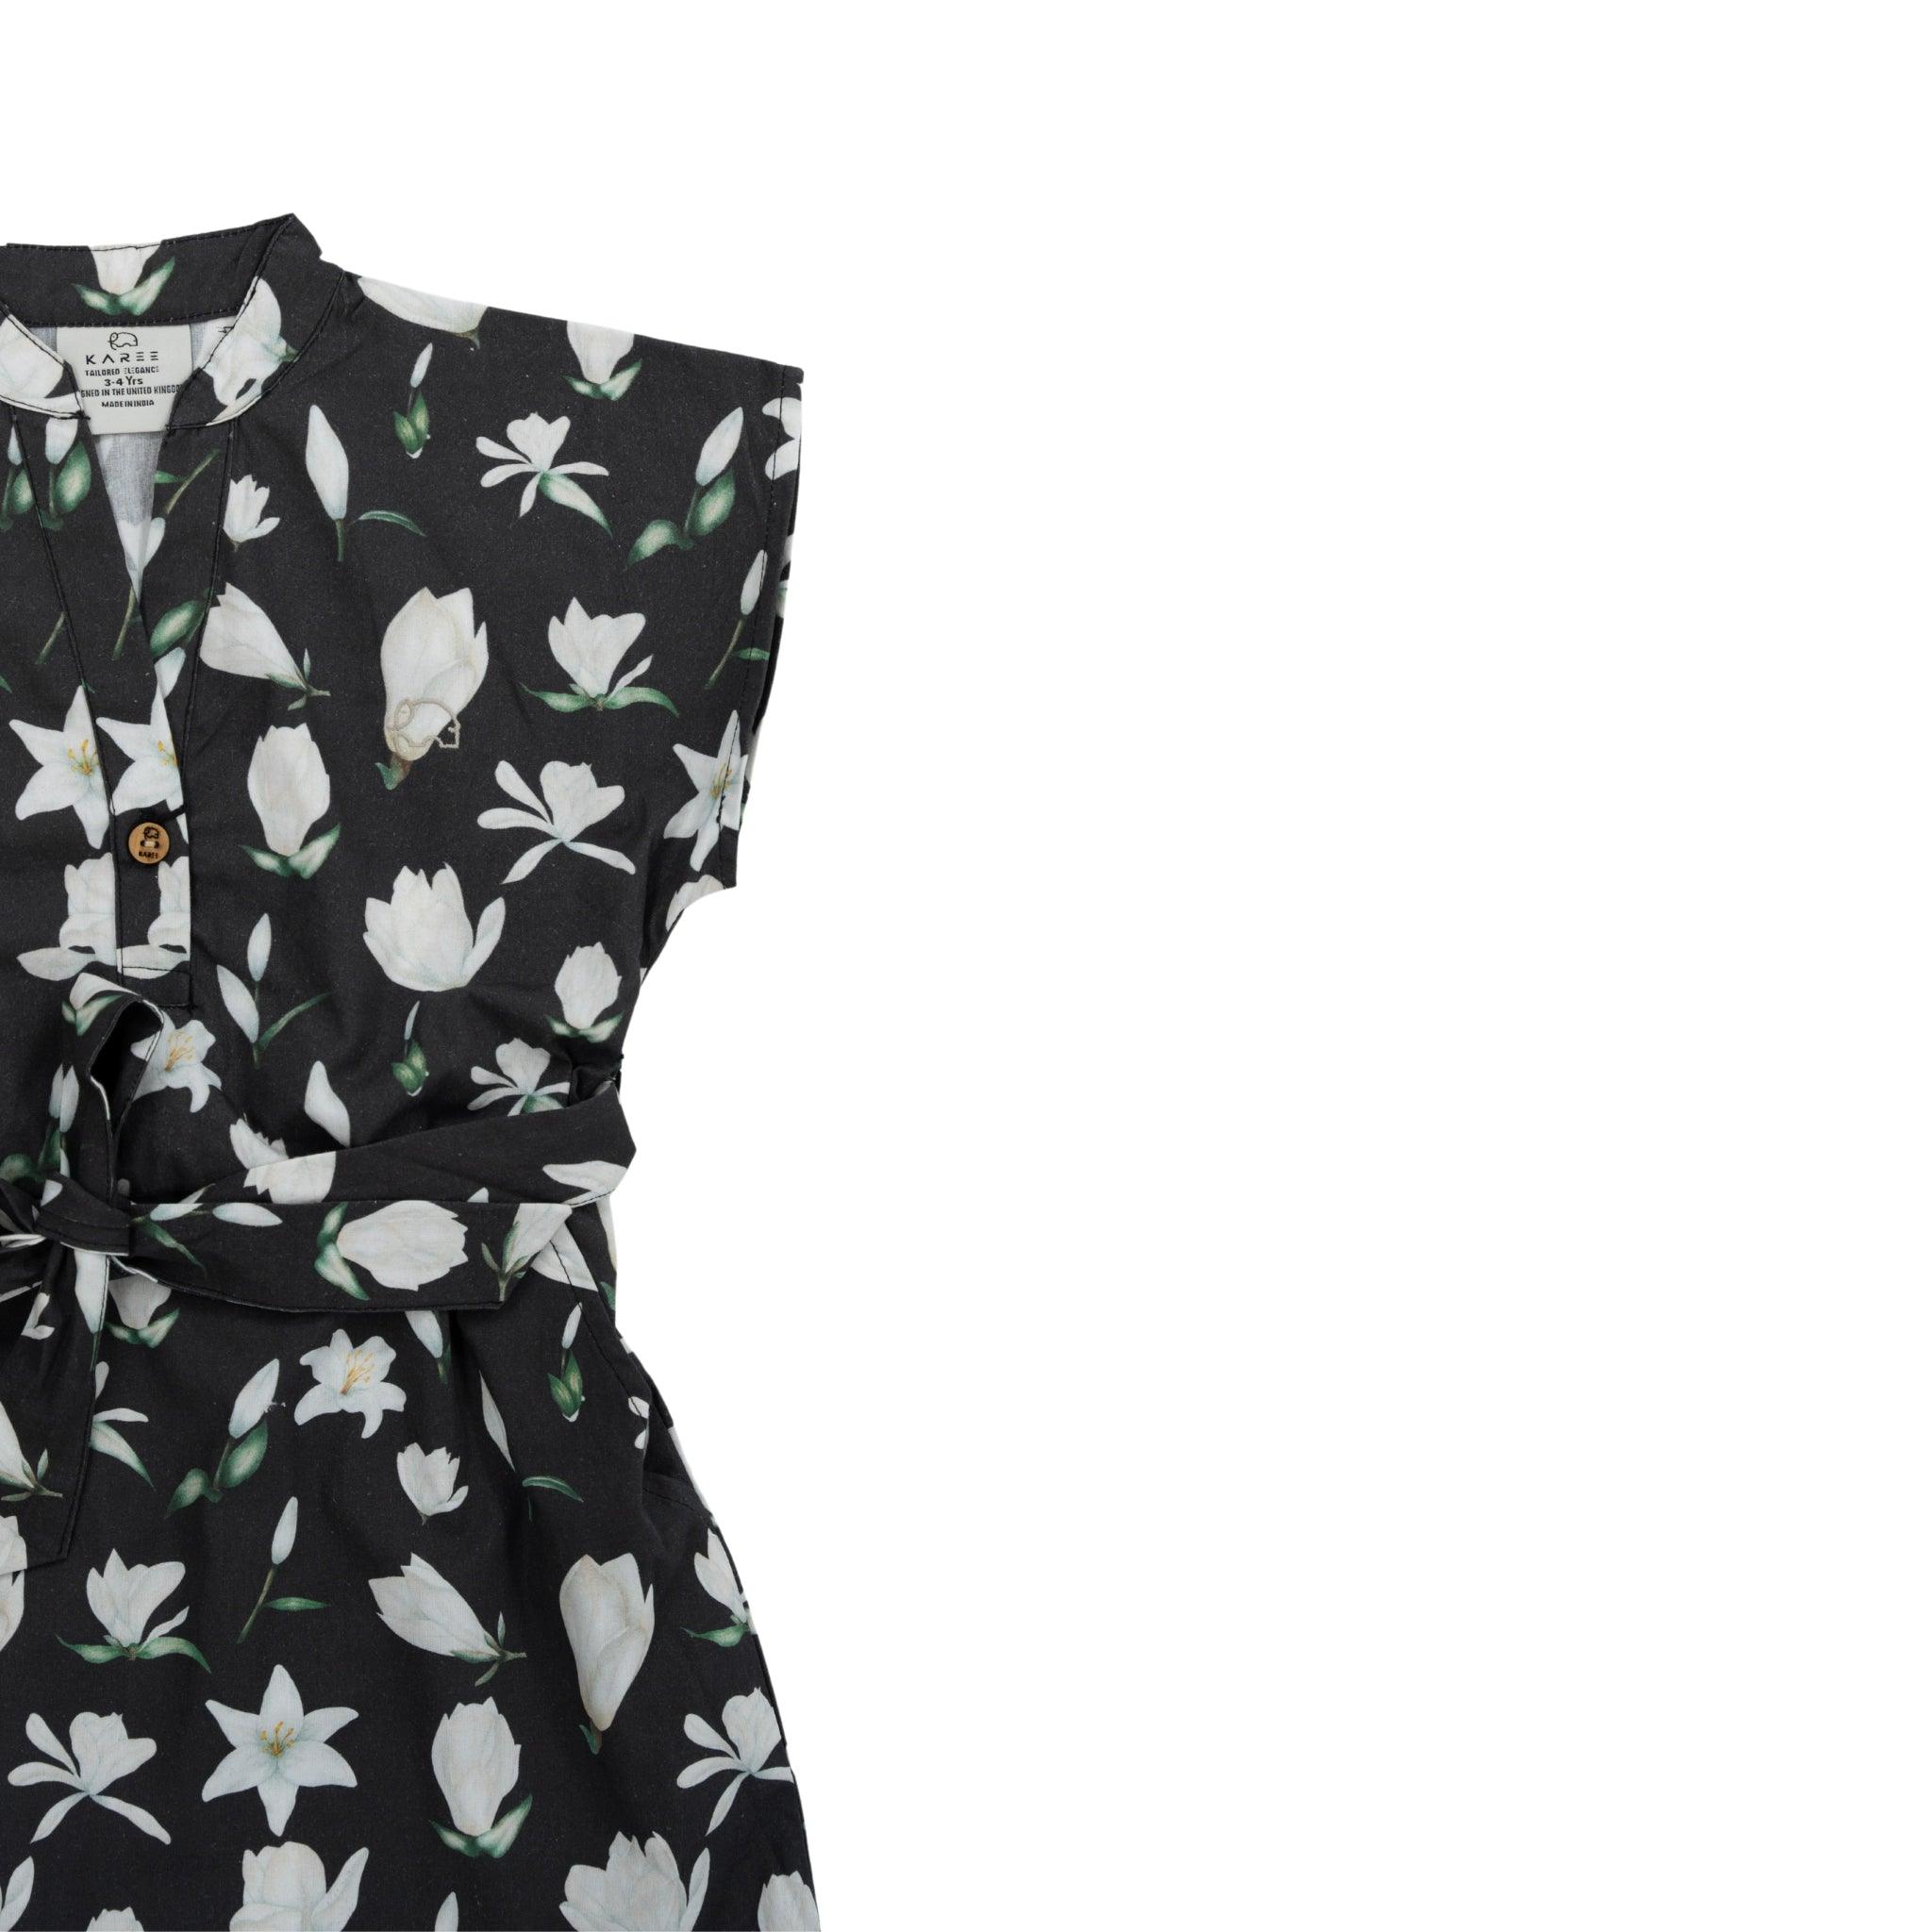 A Black Lilly Blossom cotton shirt dress with white flower prints and a waist tie, displayed against a white background.